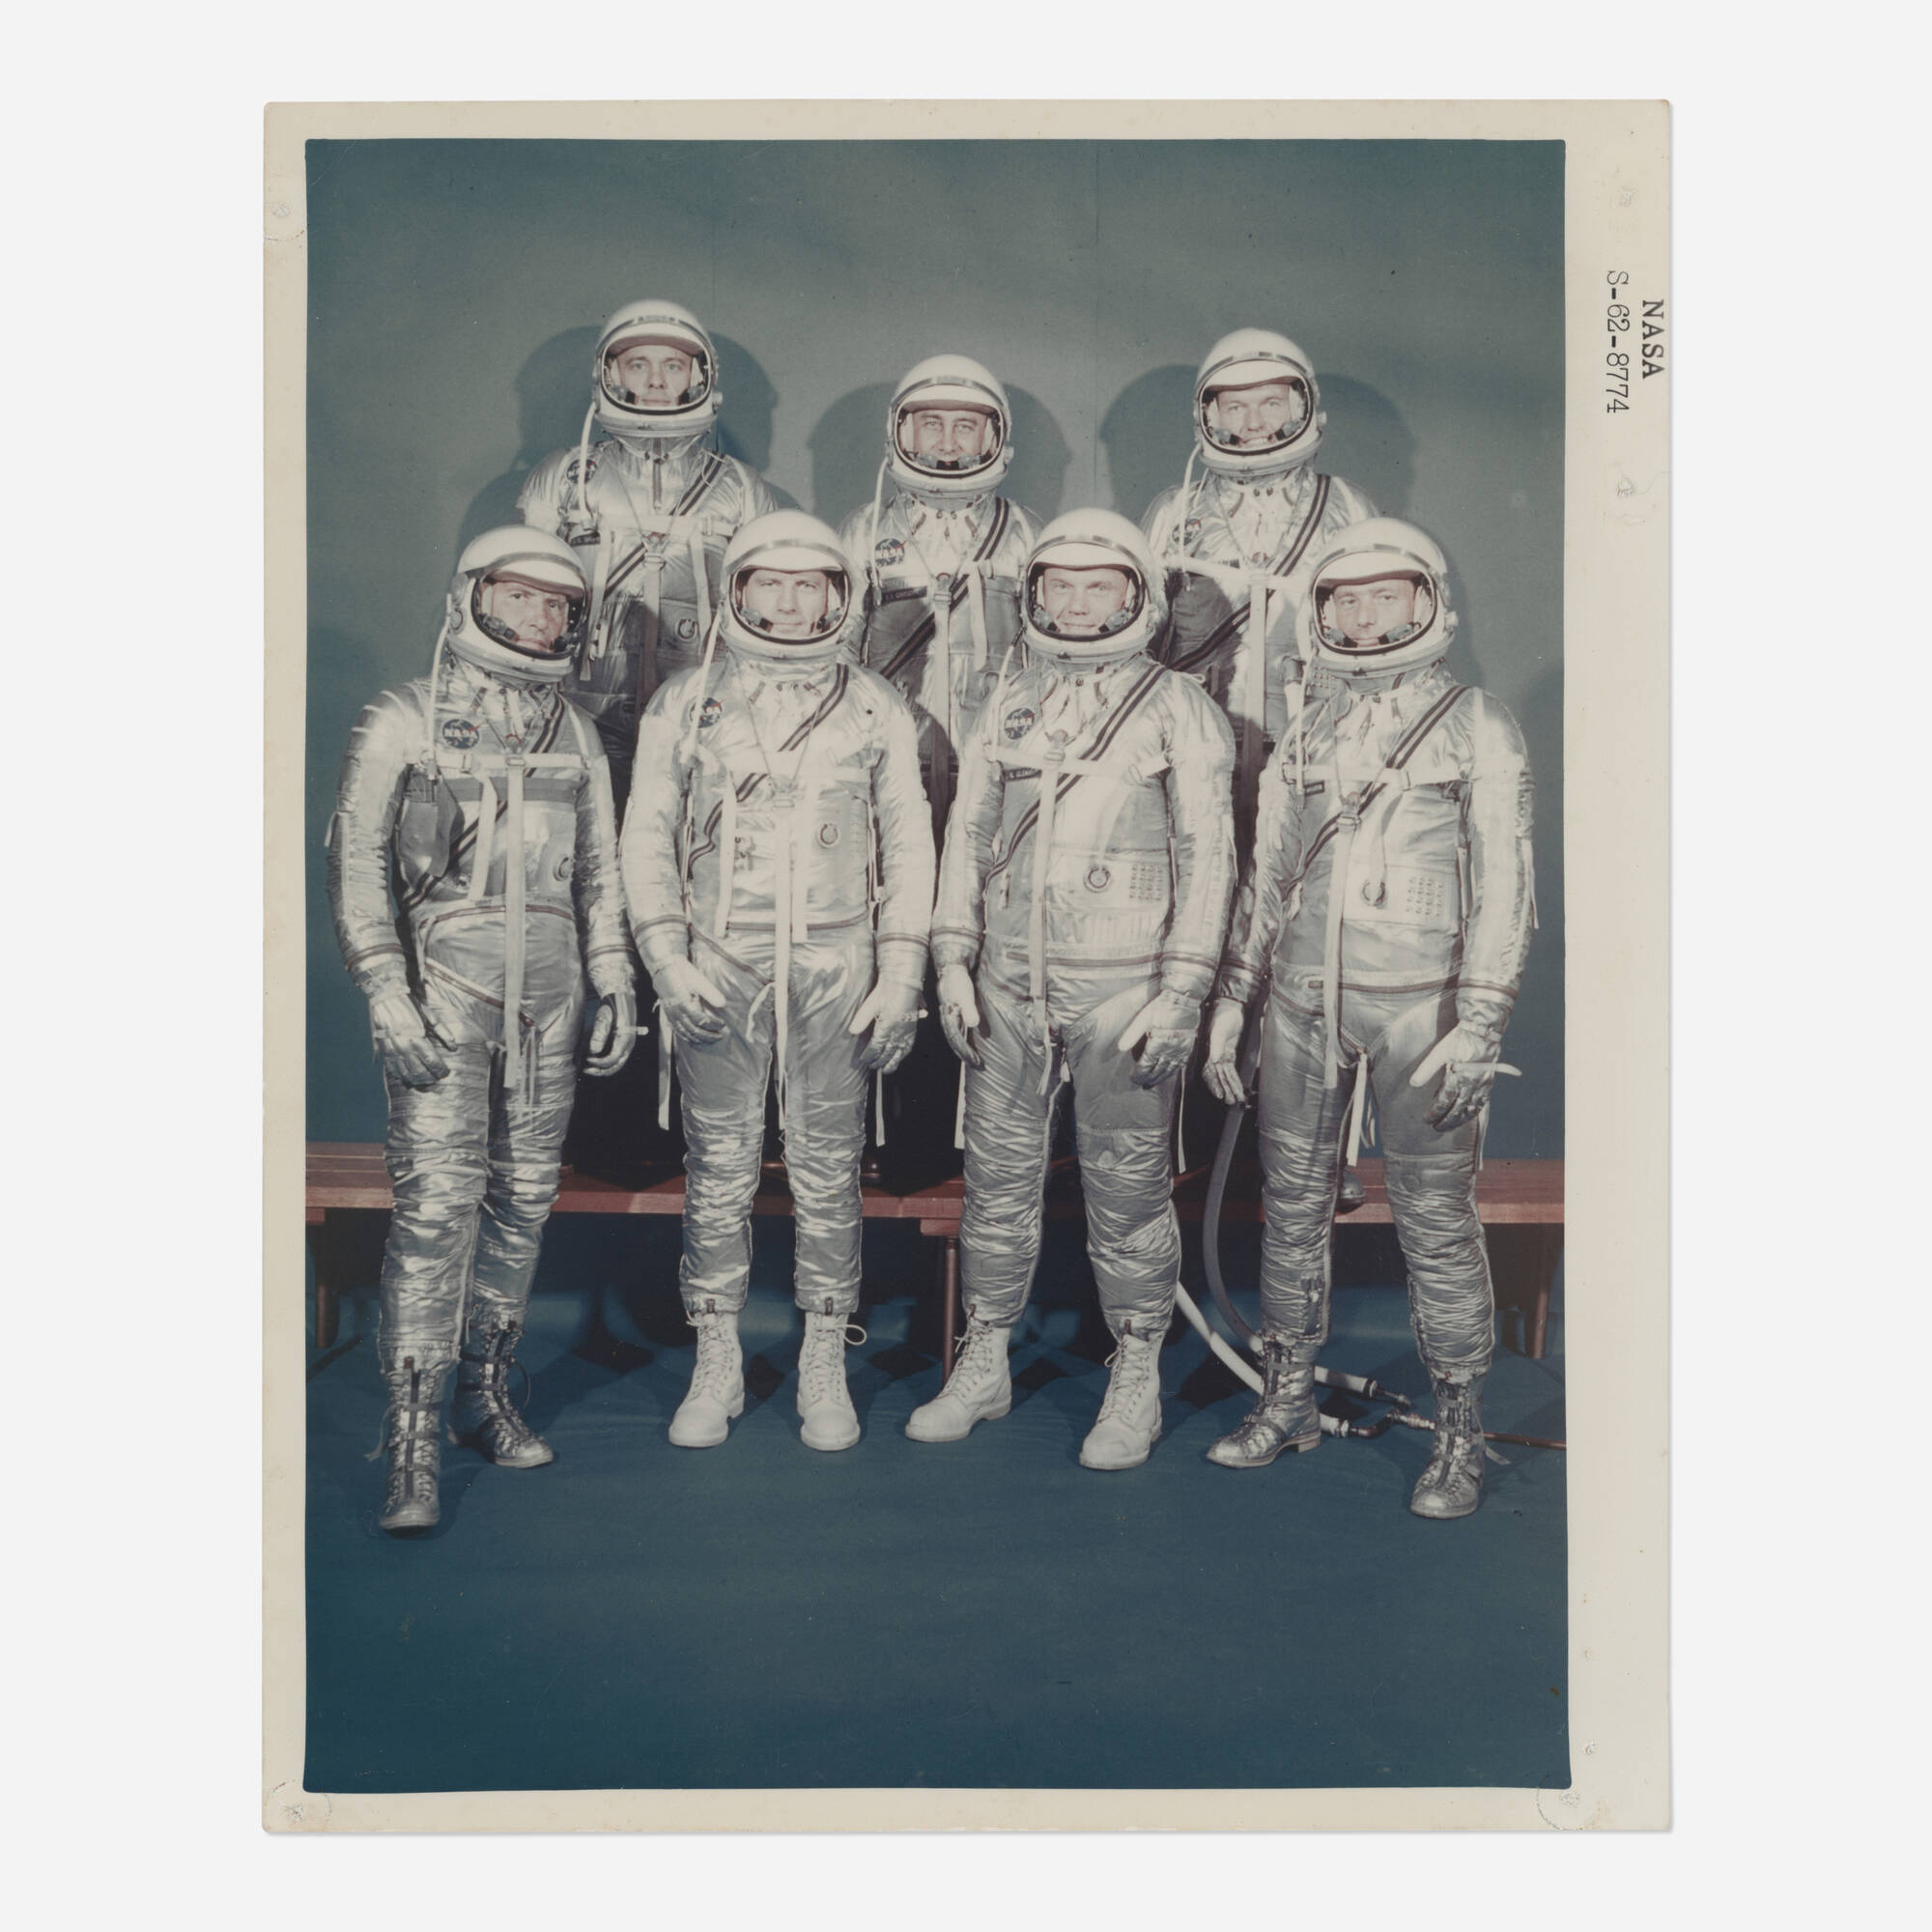 100: The first Original Seven Mercury astronauts wearing their ...